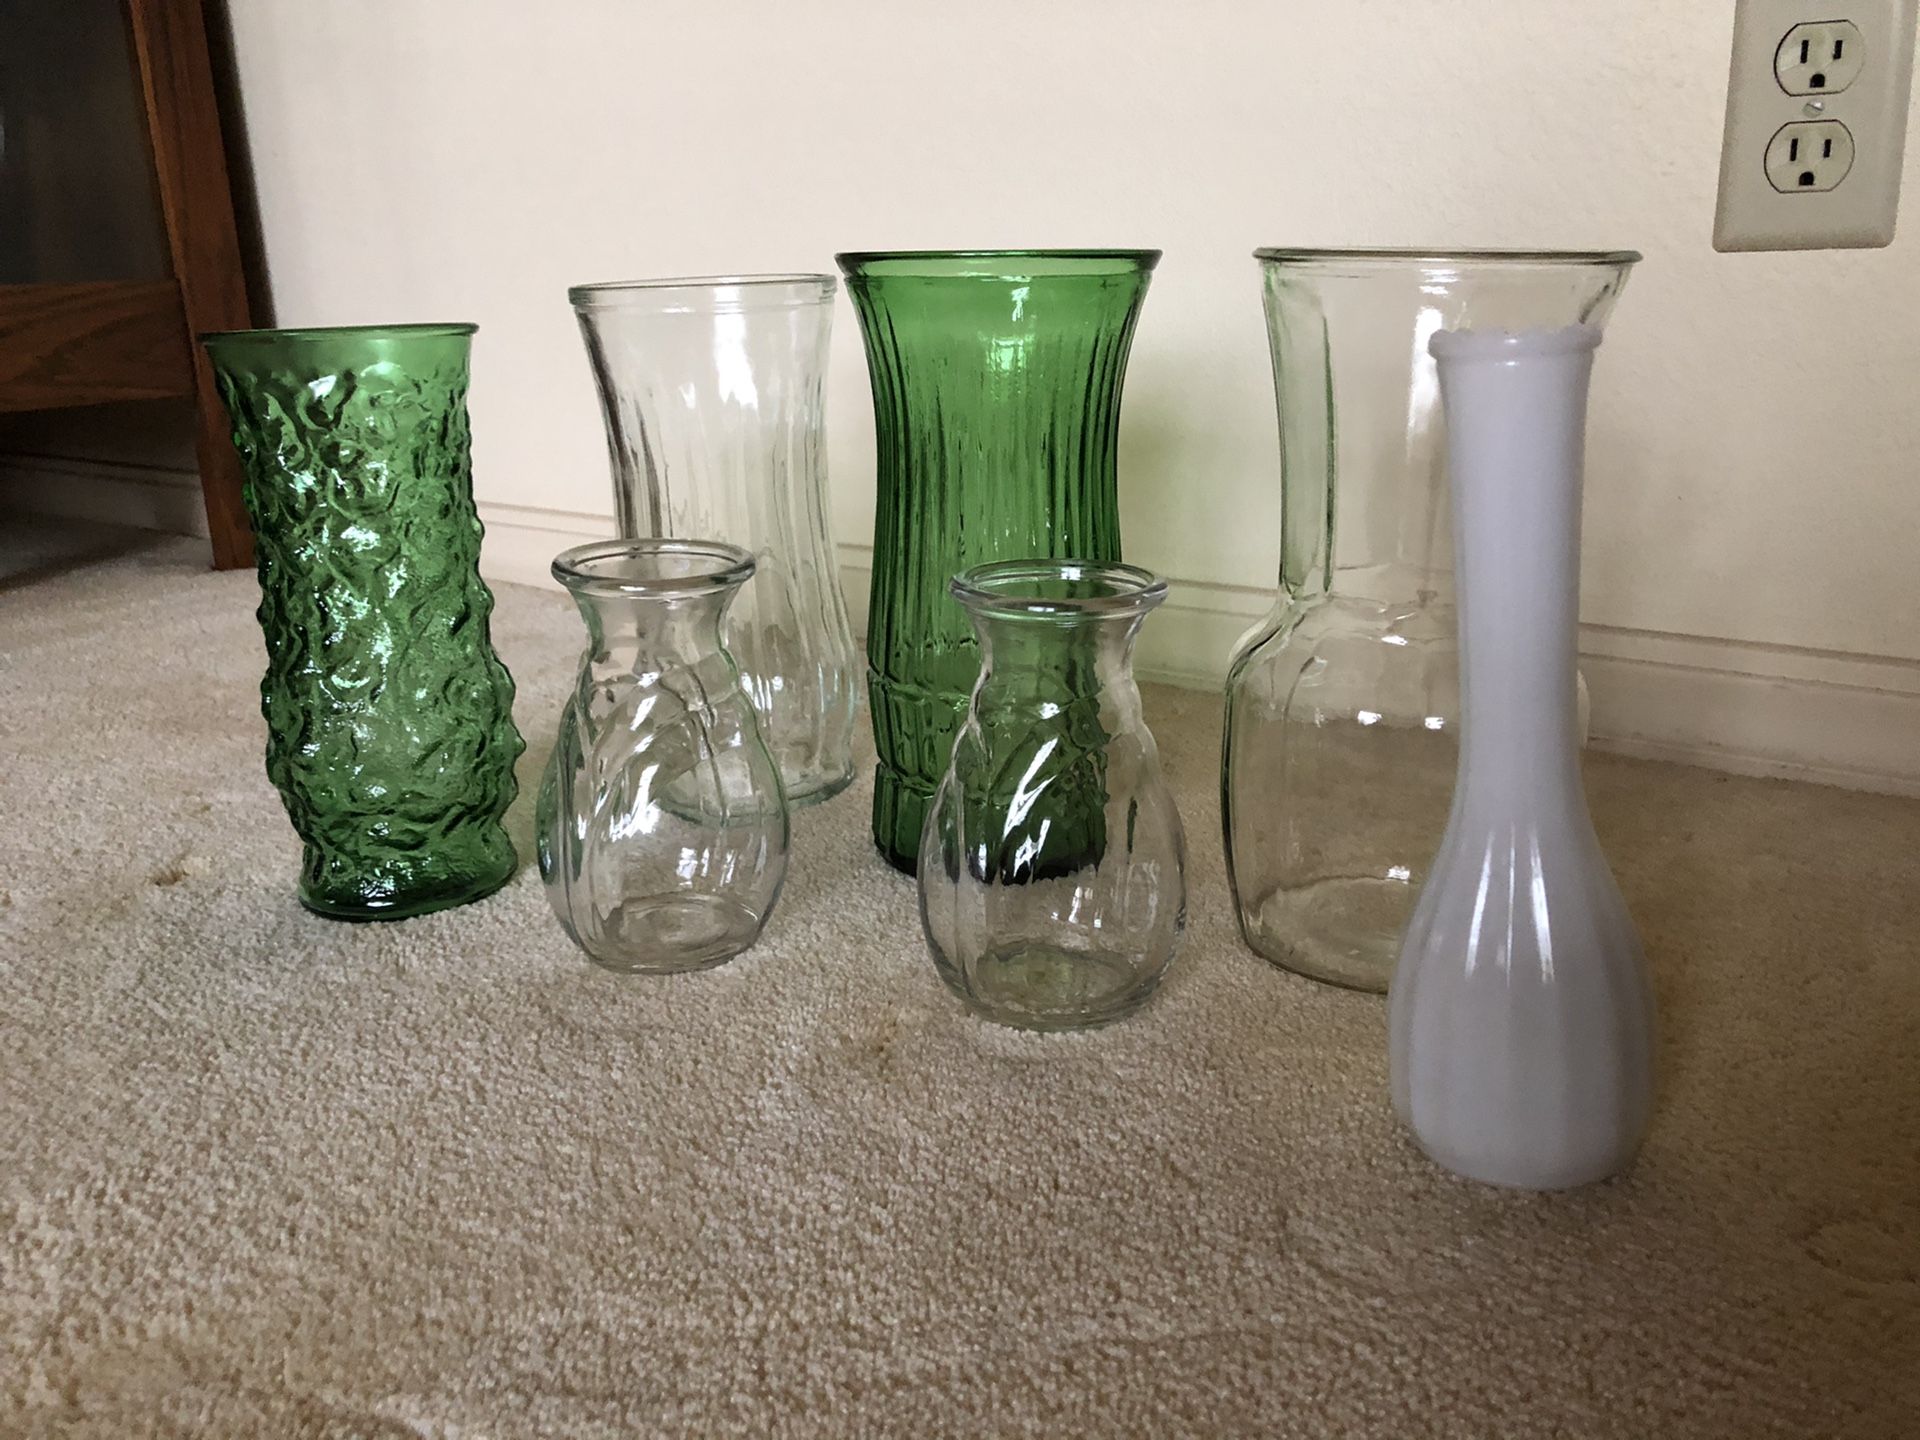 7. Assorted vases